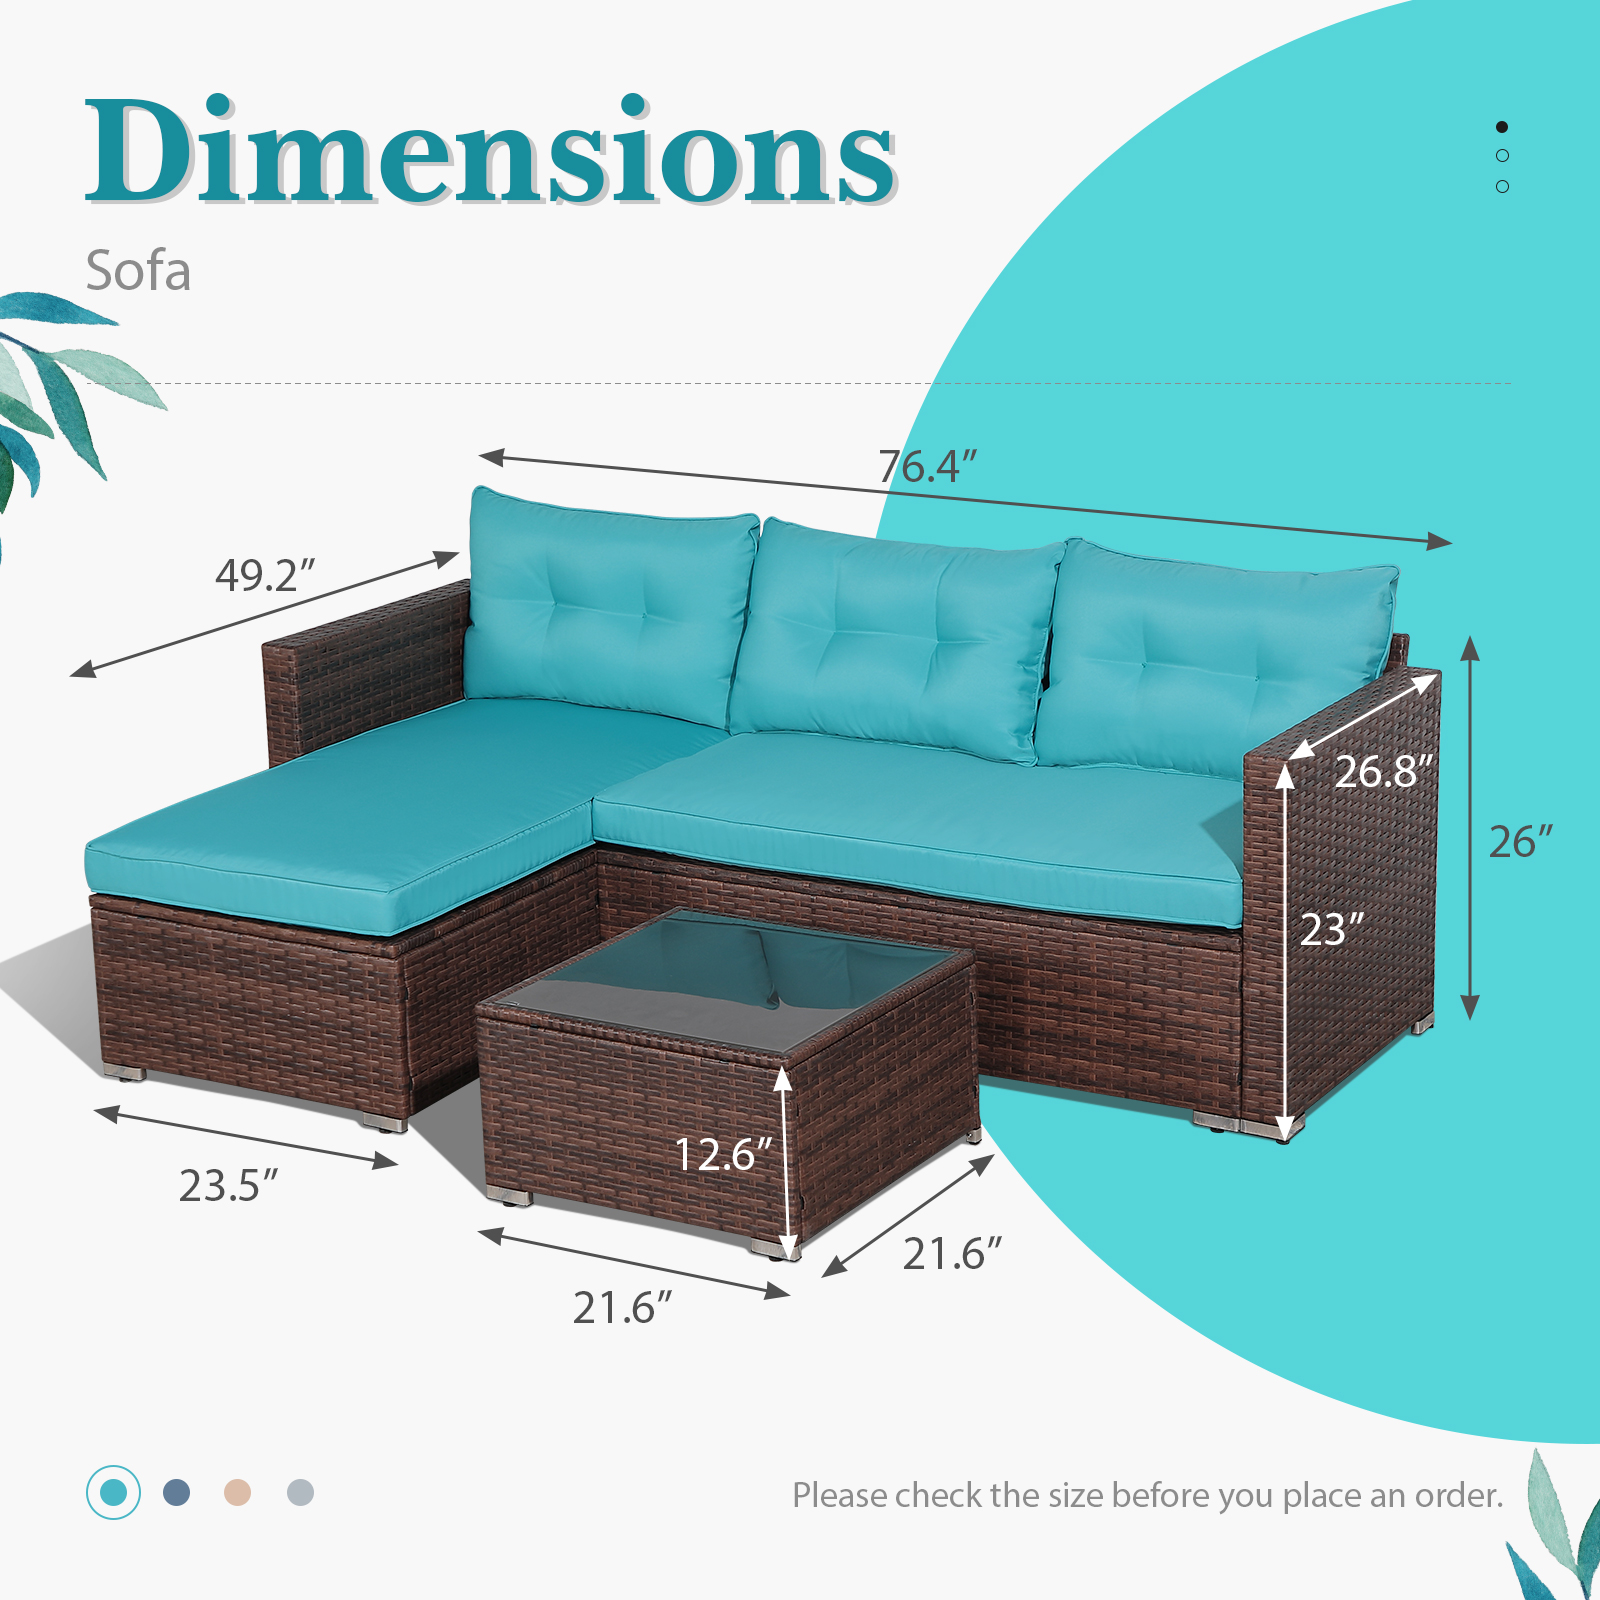 OC Orange-Casual 5-Piece Patio Furniture Set, All-Weather Outdoor Sectional Sofa, with Glass Coffee Table for Deck Balcony Porch, Brown Rattan & Turquoise Cushion - image 4 of 8